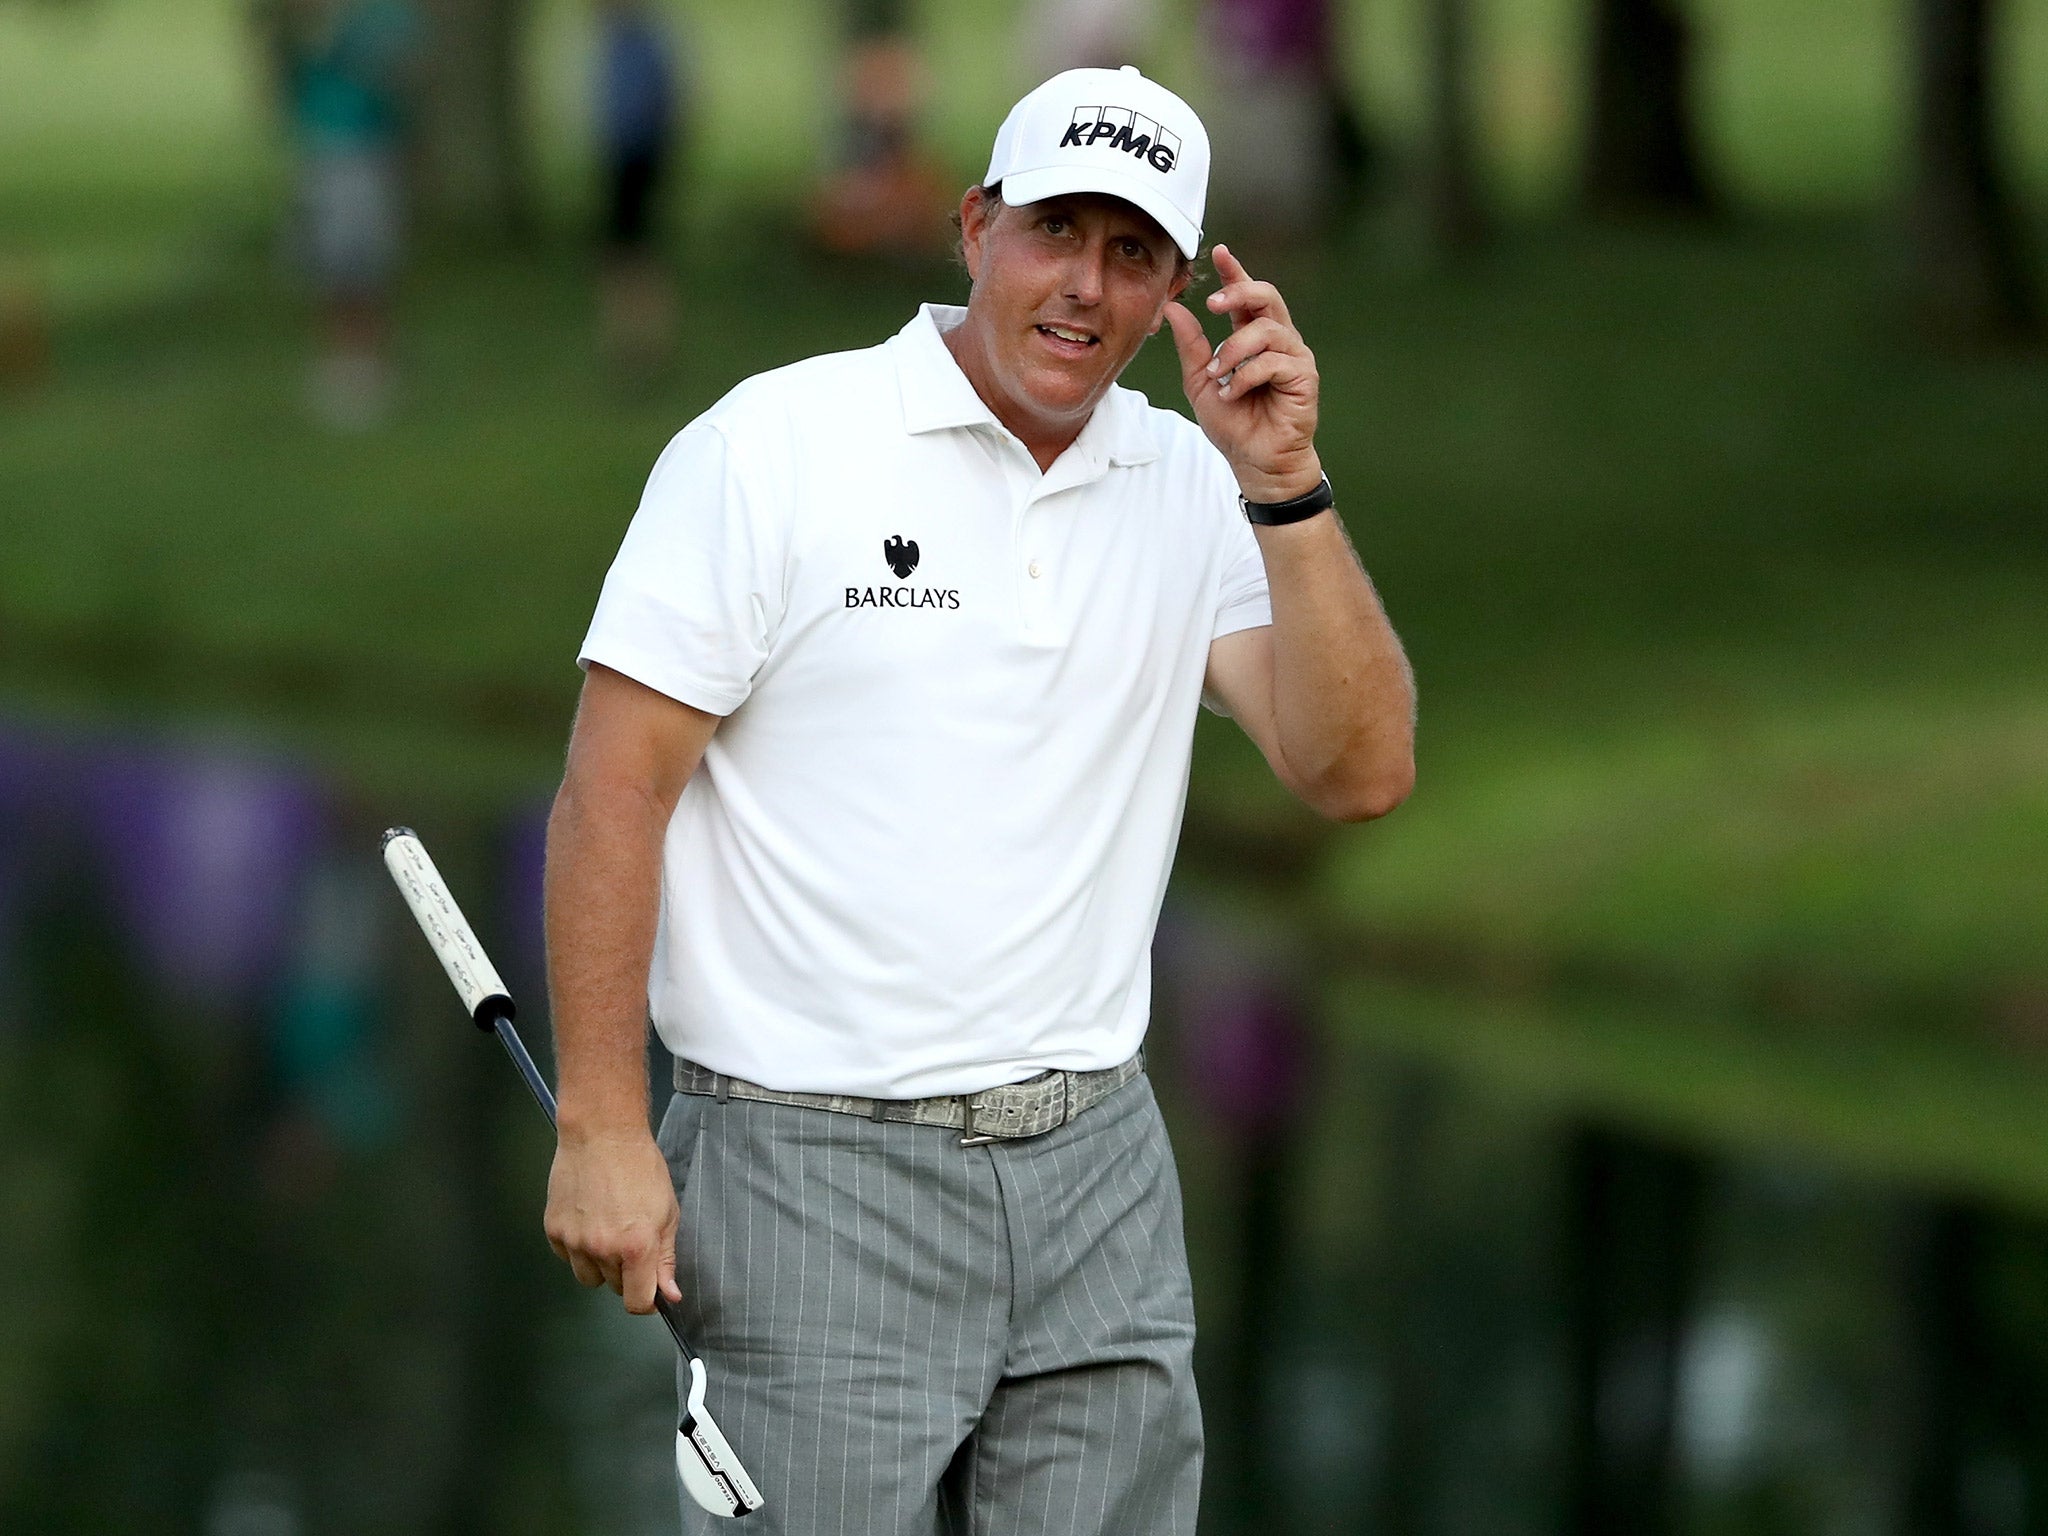 Phil Mickelson carries historic Ryder Cup passion into the competition